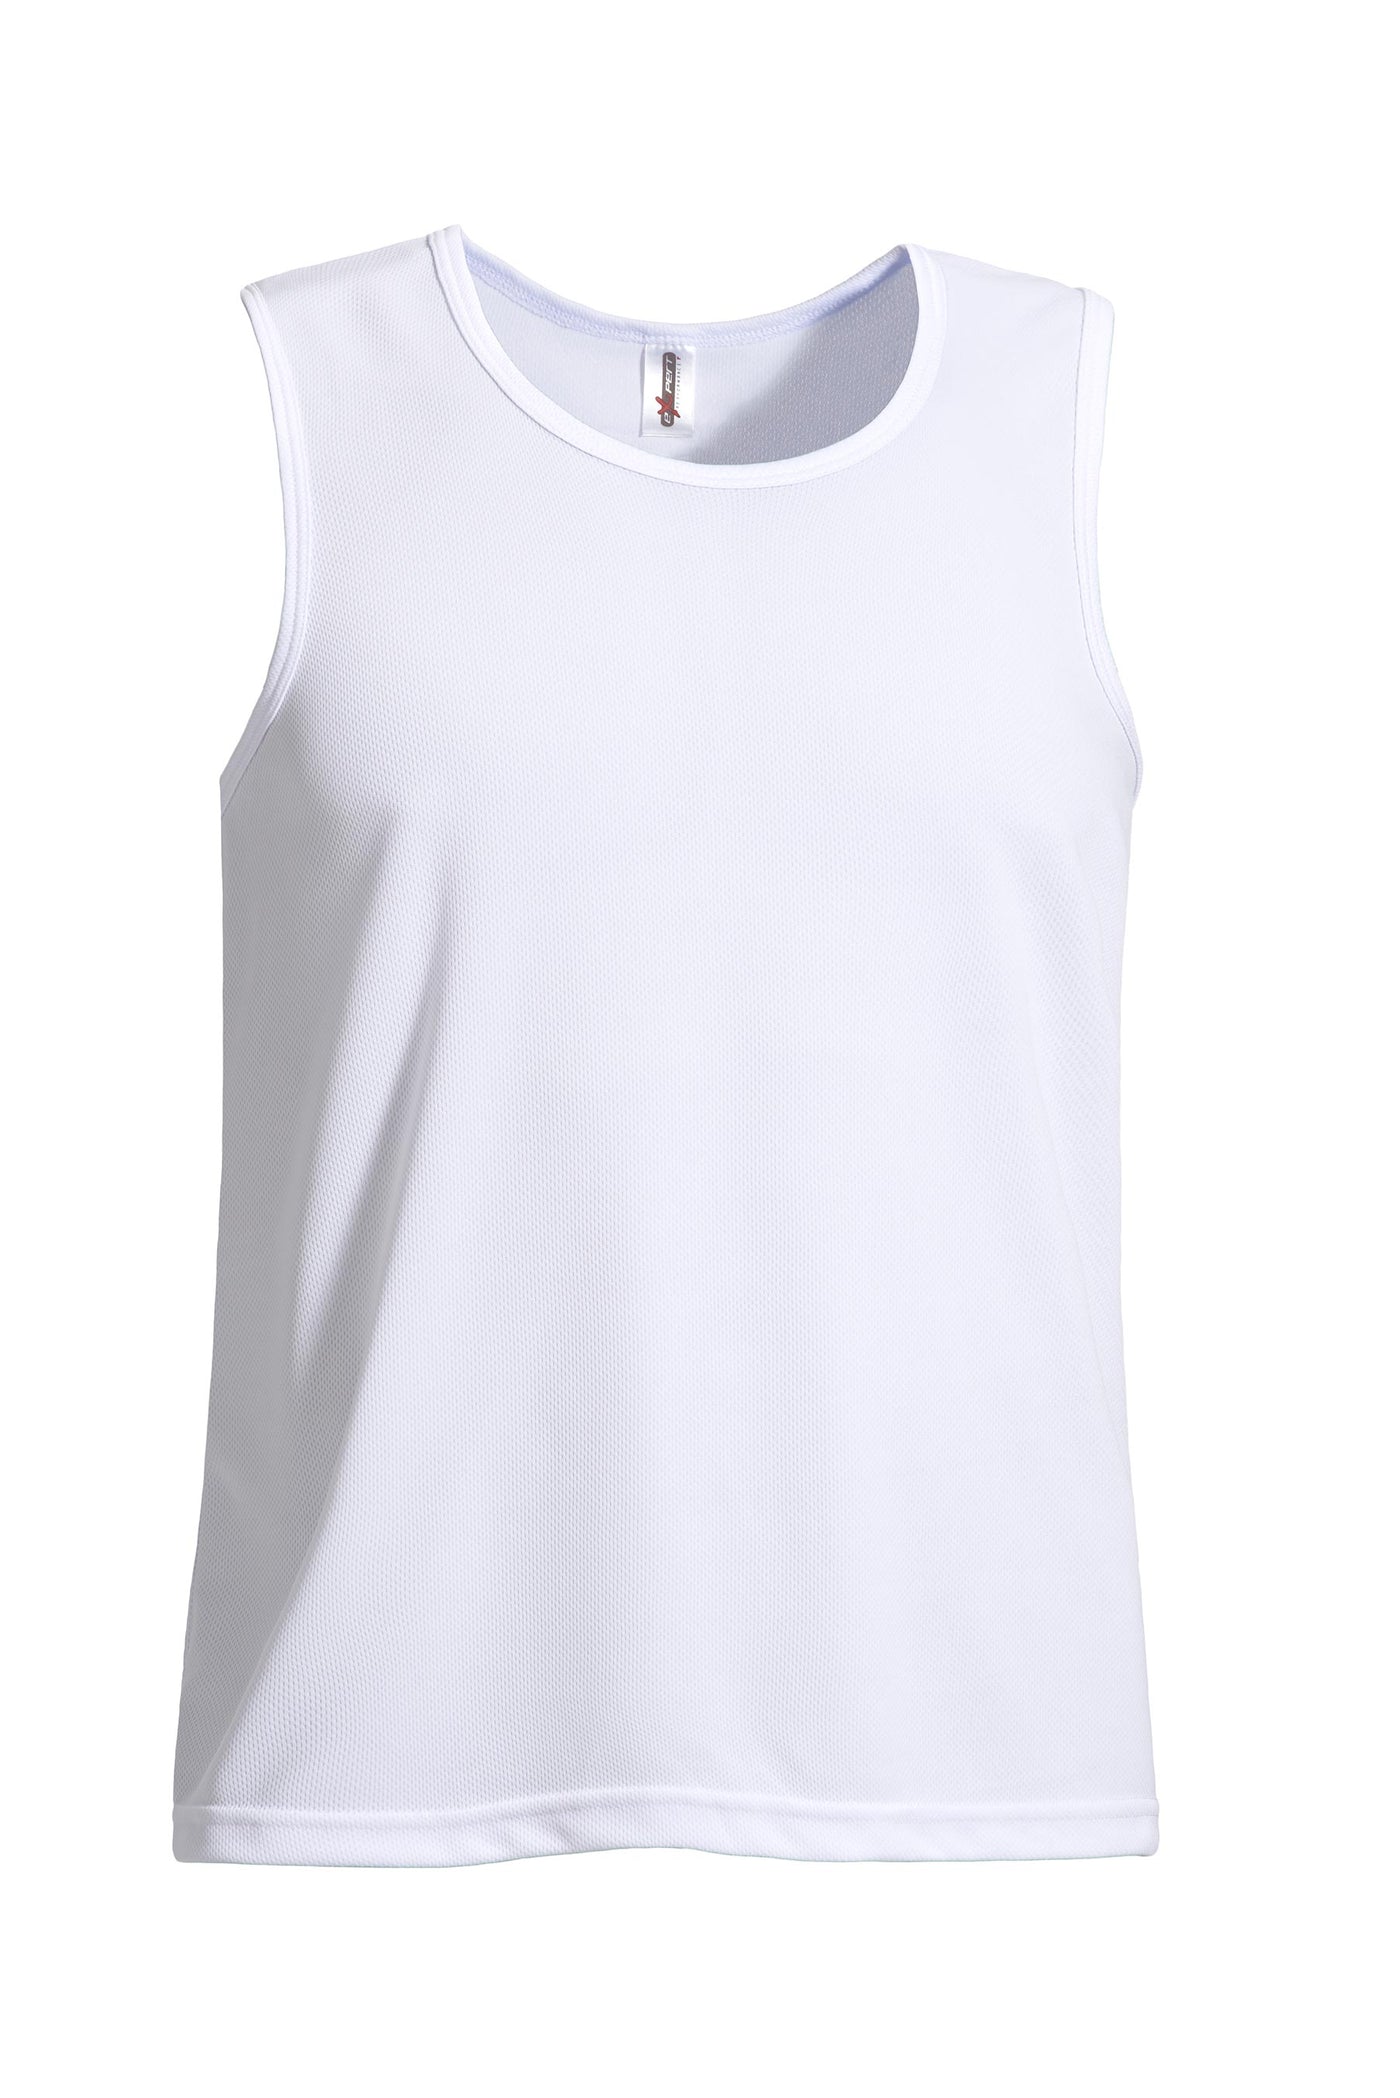 Expert Brand Retail Men's Oxymesh Tank Top Made in USA white#color_white